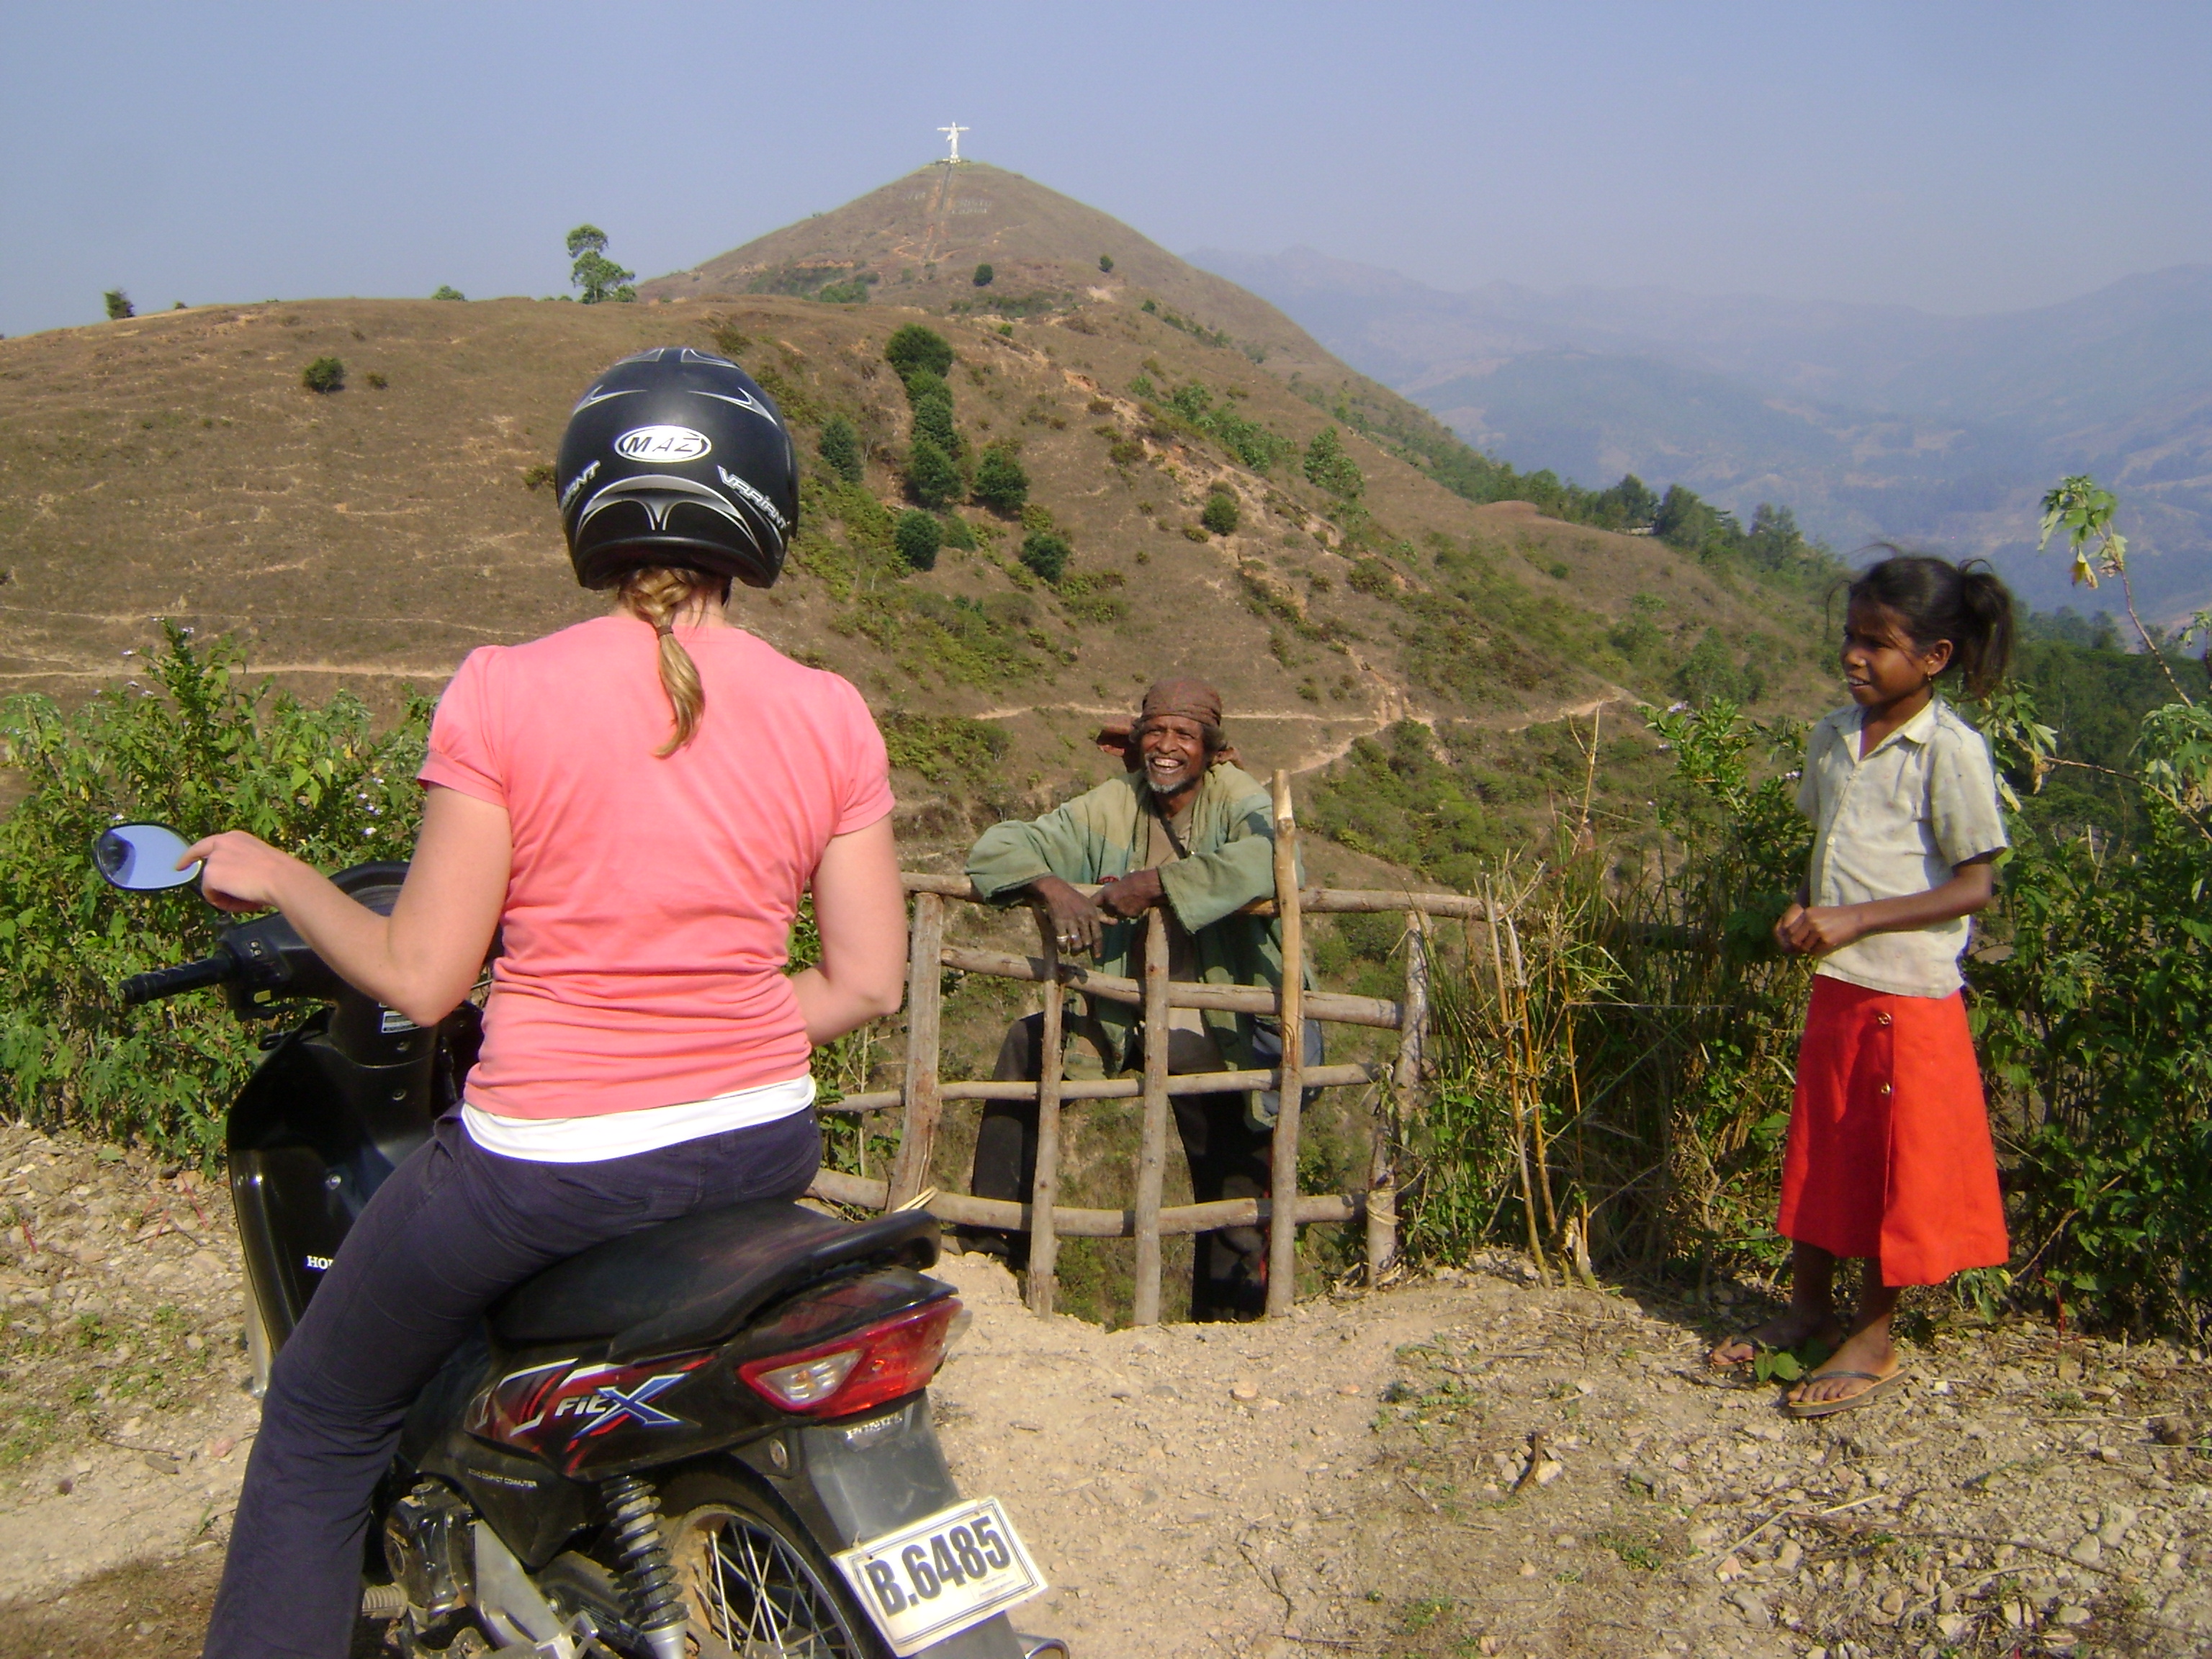 Woman on motorbike chatting with locals in Timor-Leste